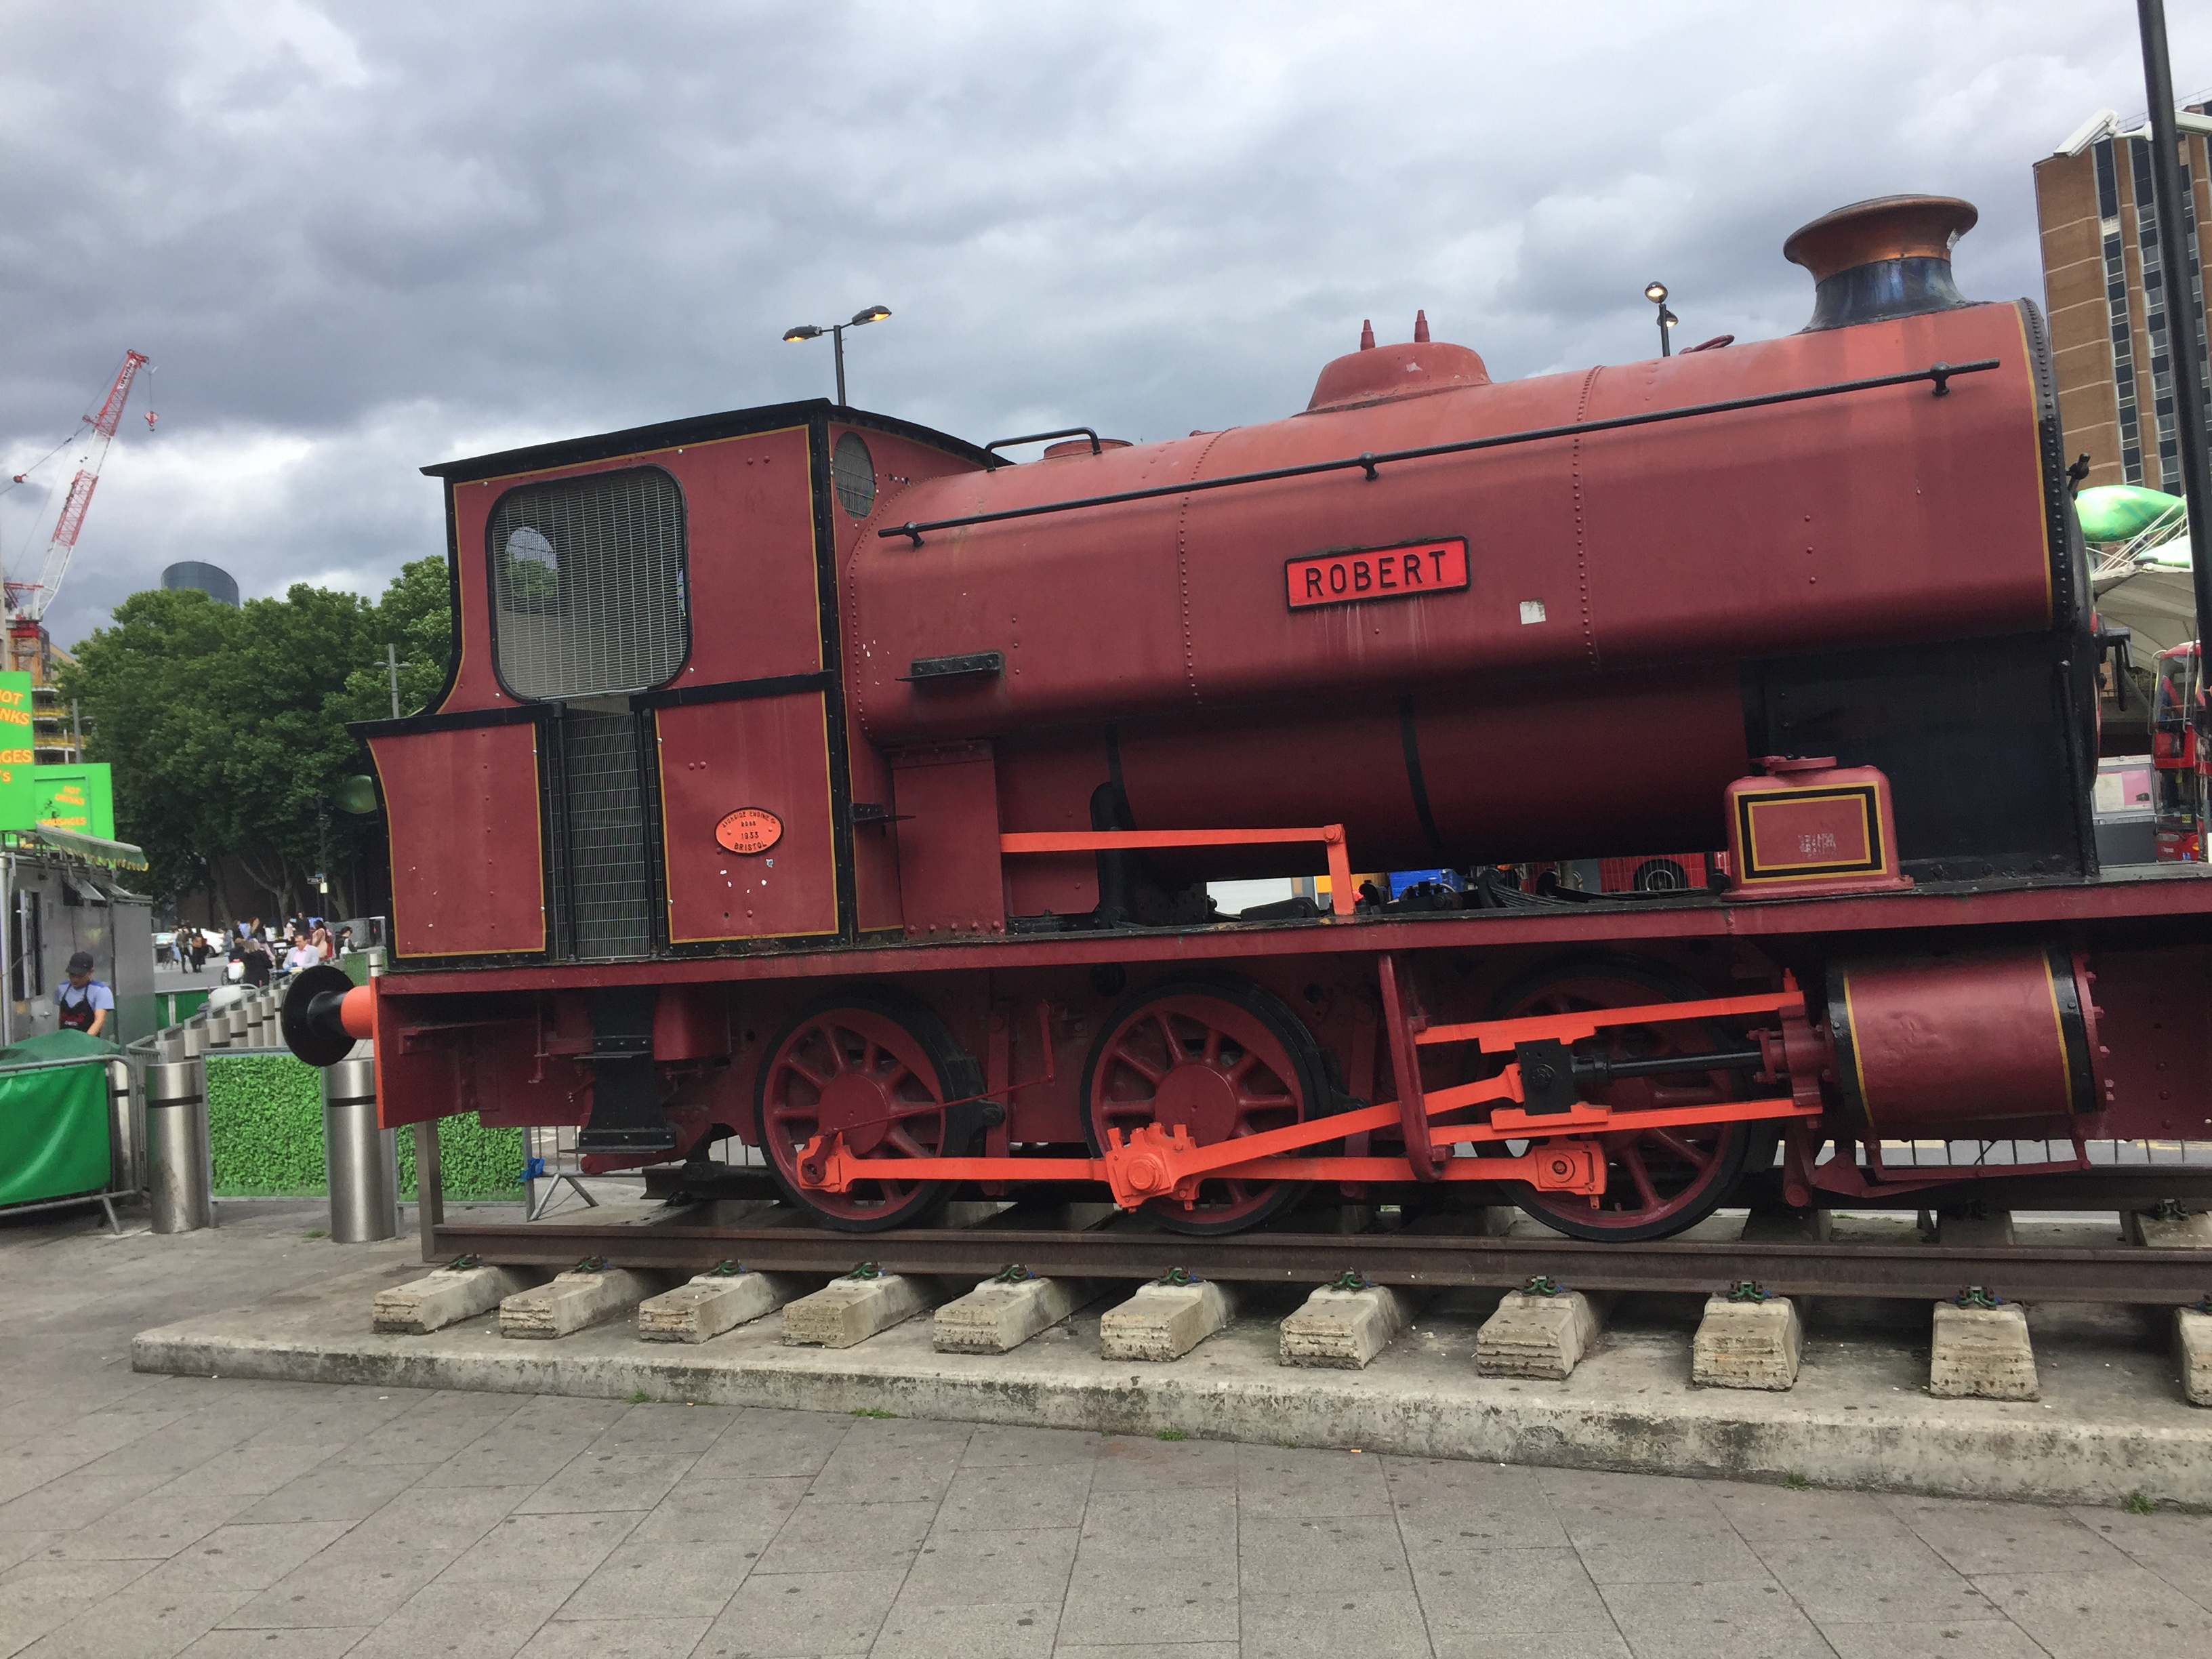 A large red steam train, with the name Robert in a small plaque on the side, sits on a small section of railway track placed outside Stratford Station.